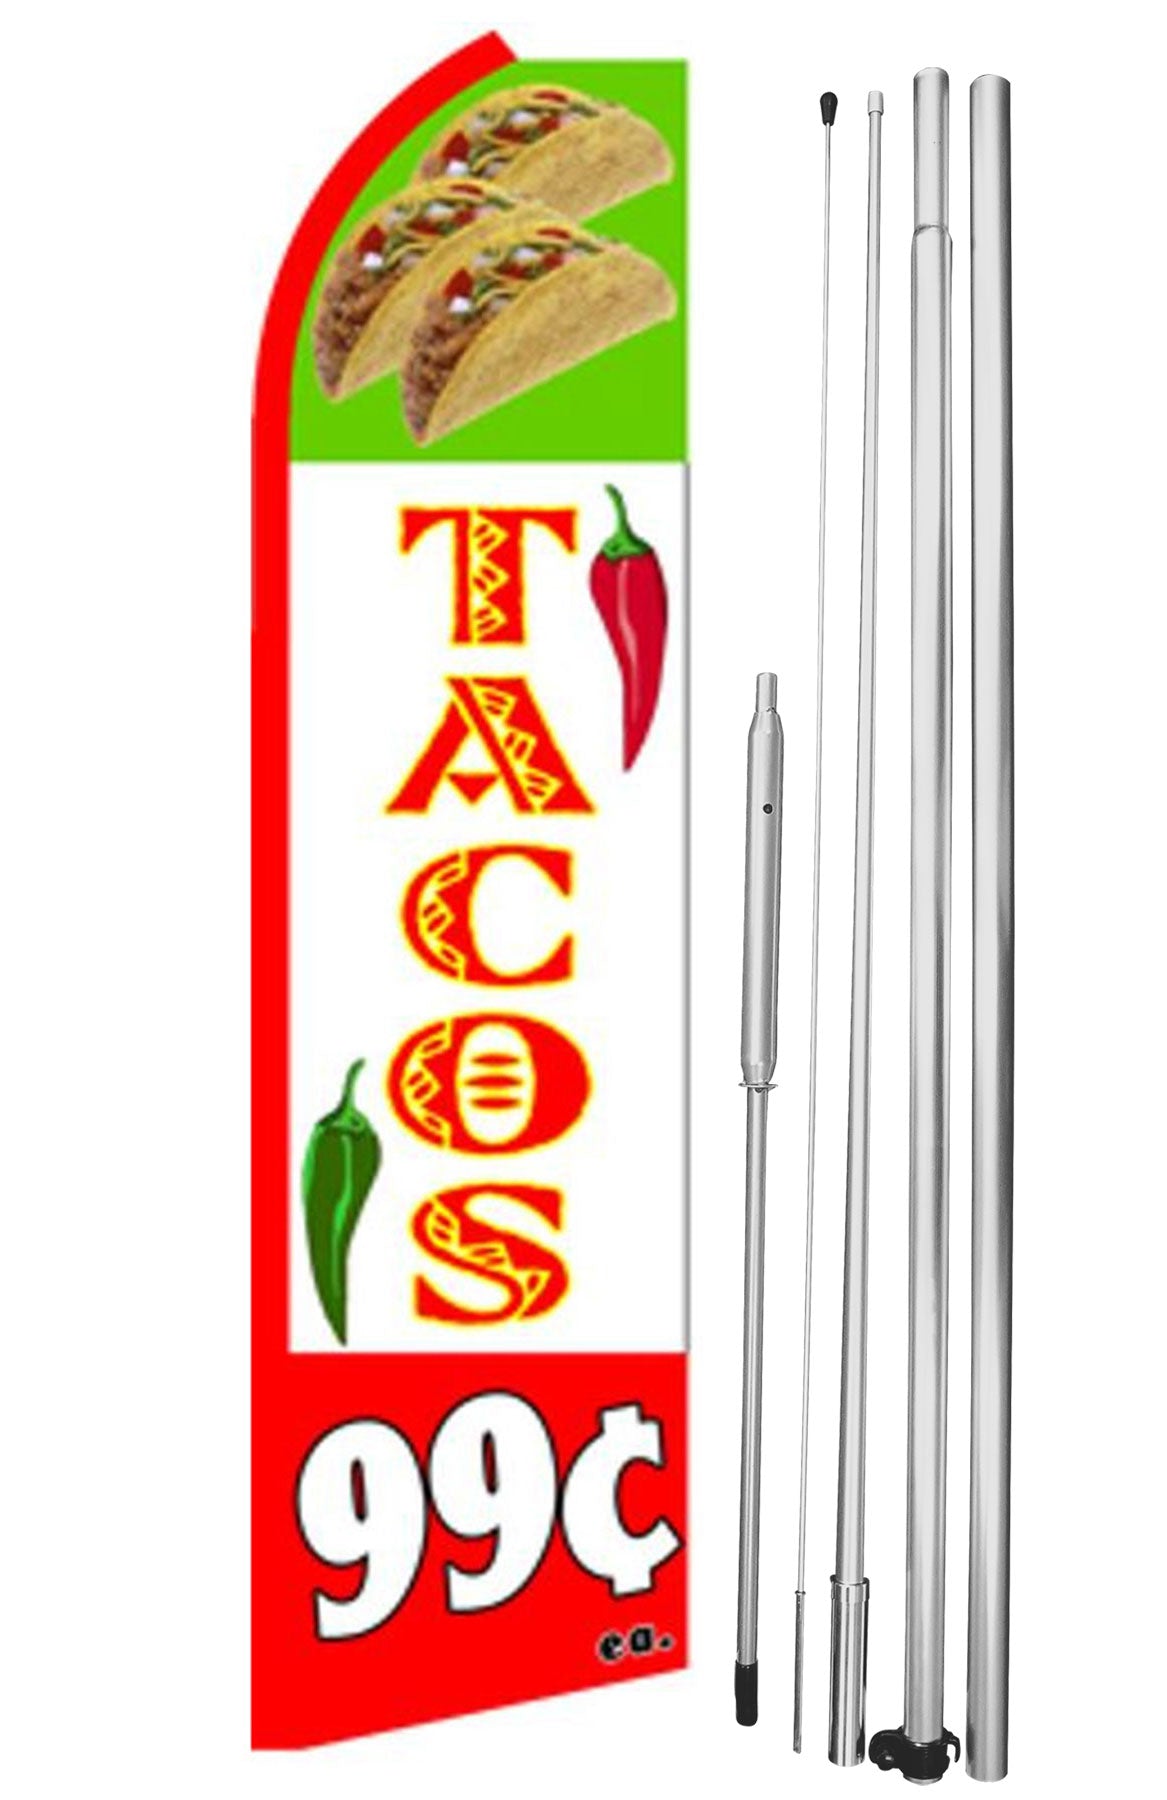 Tacos 99cents